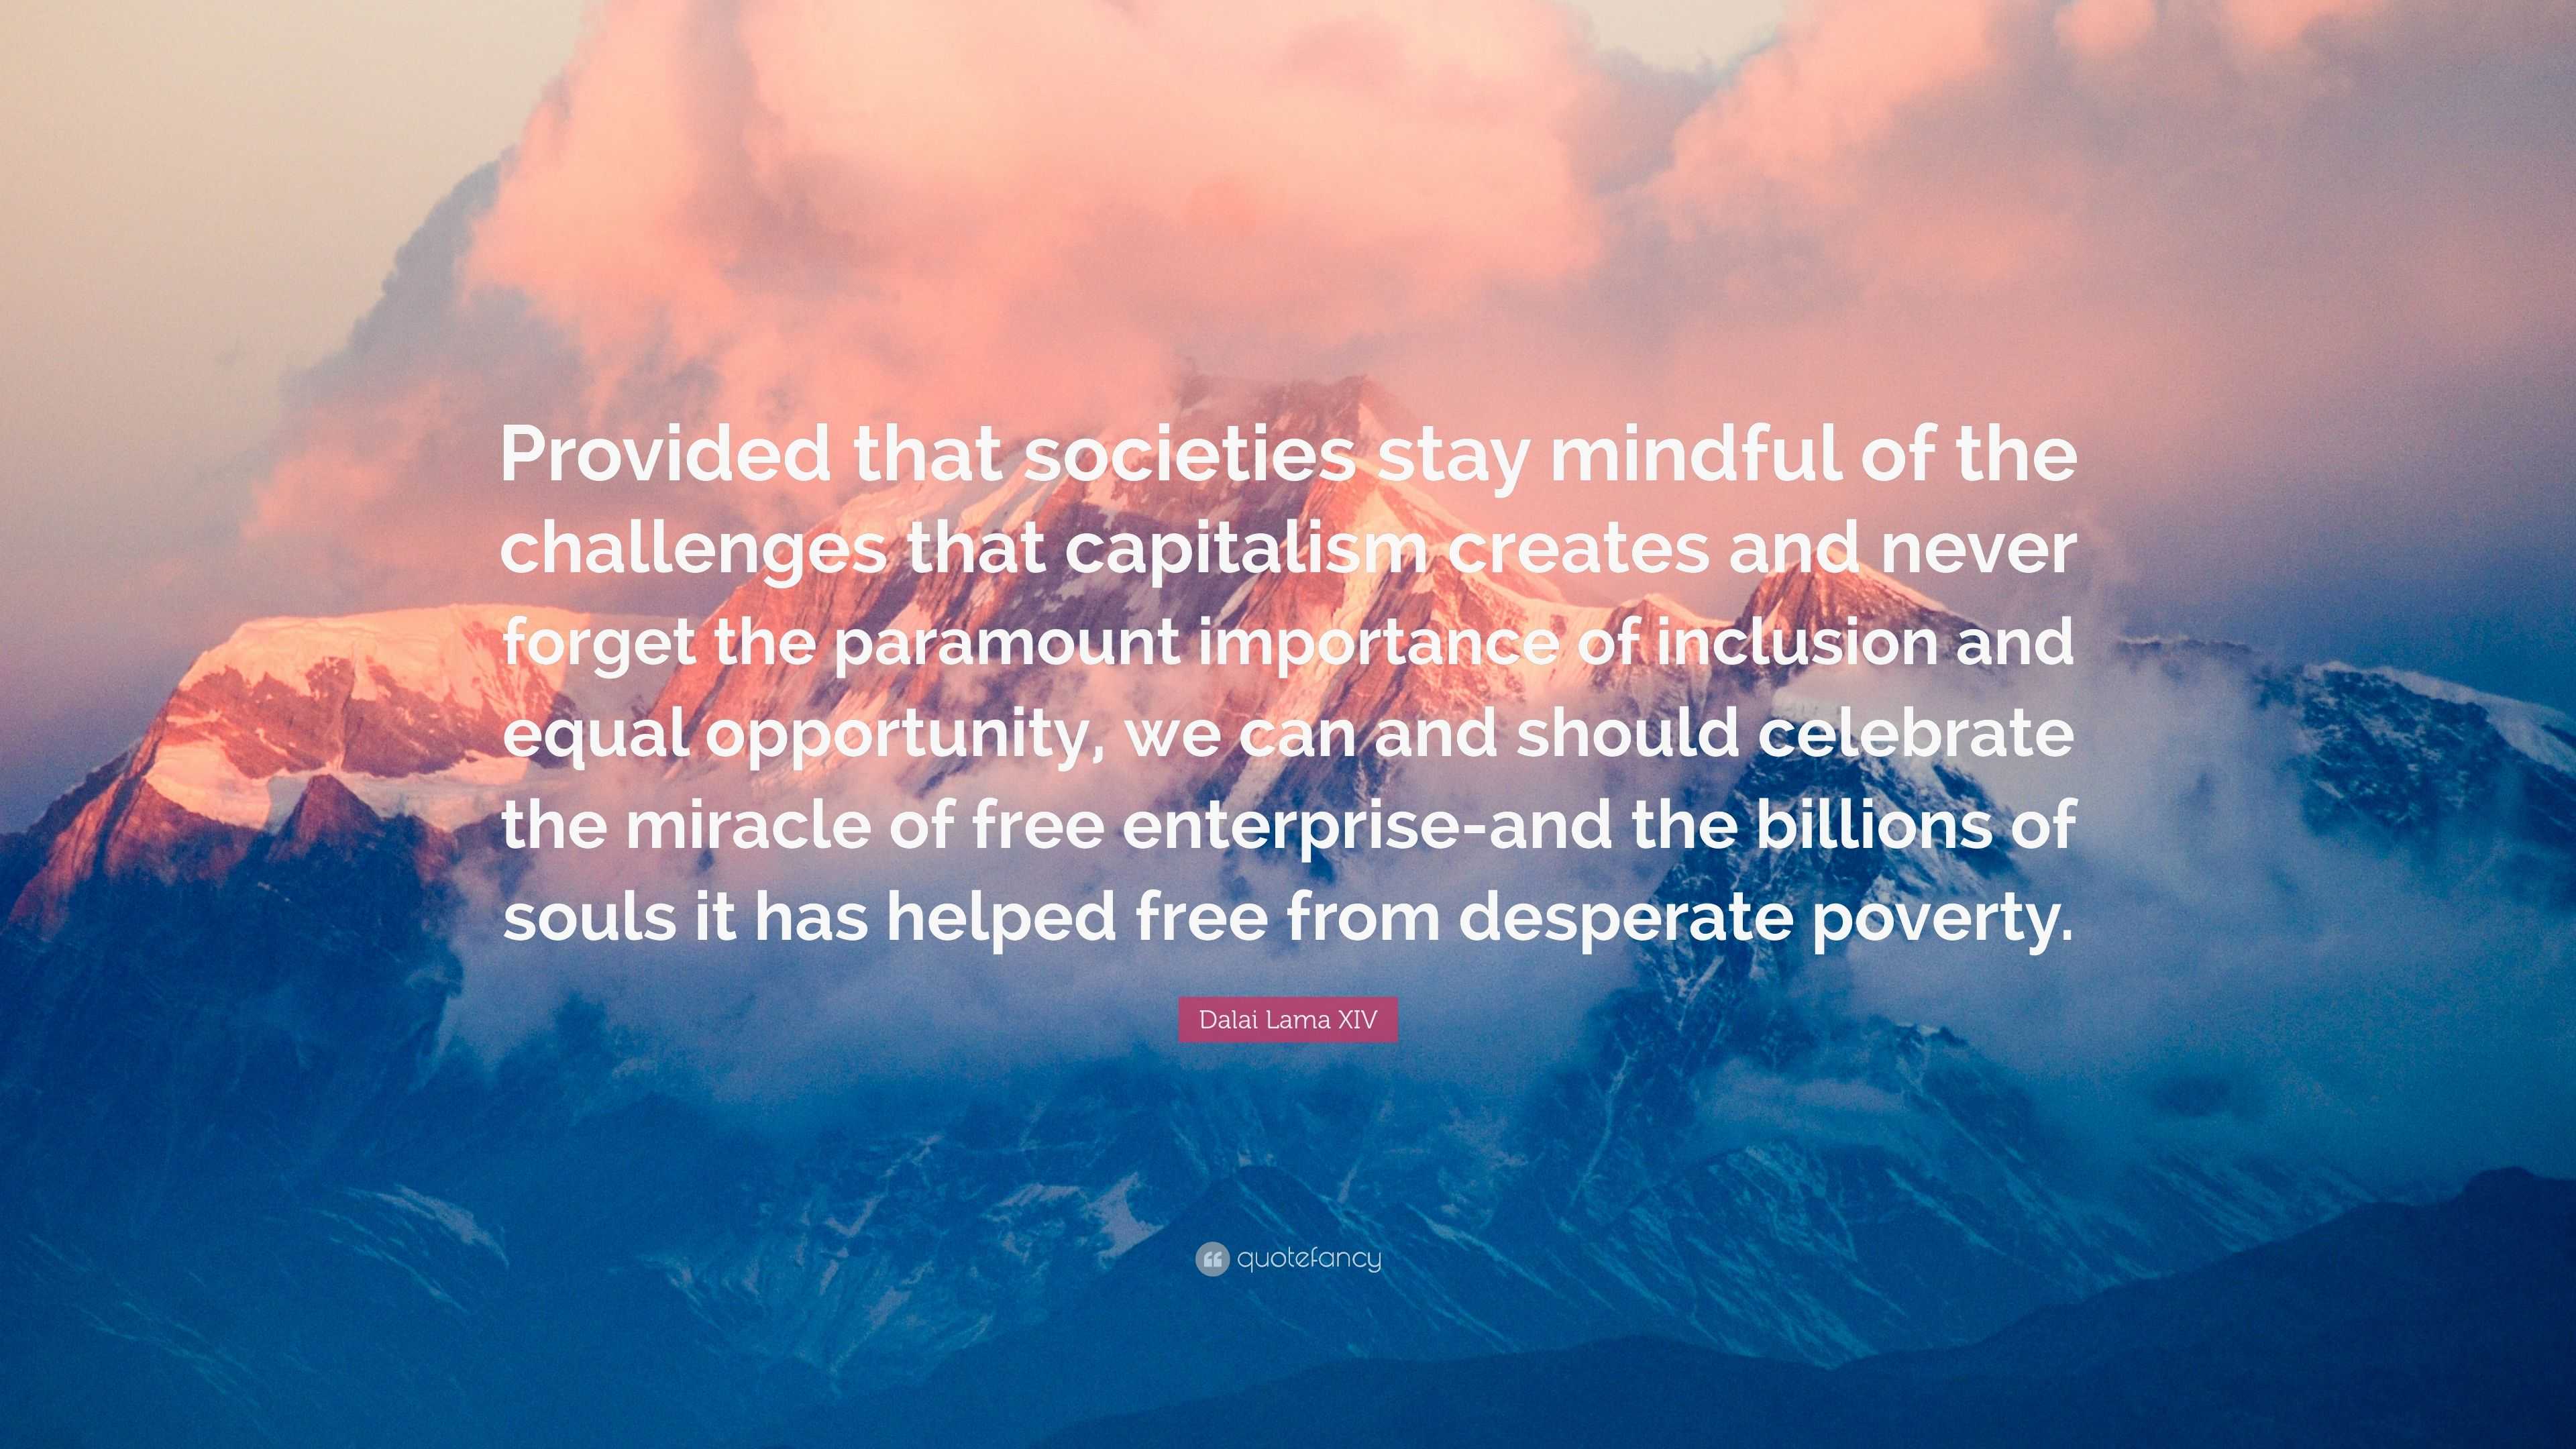 Dalai Lama XIV Quote: “Provided that societies stay mindful of the  challenges that capitalism creates and never forget the paramount  importance”